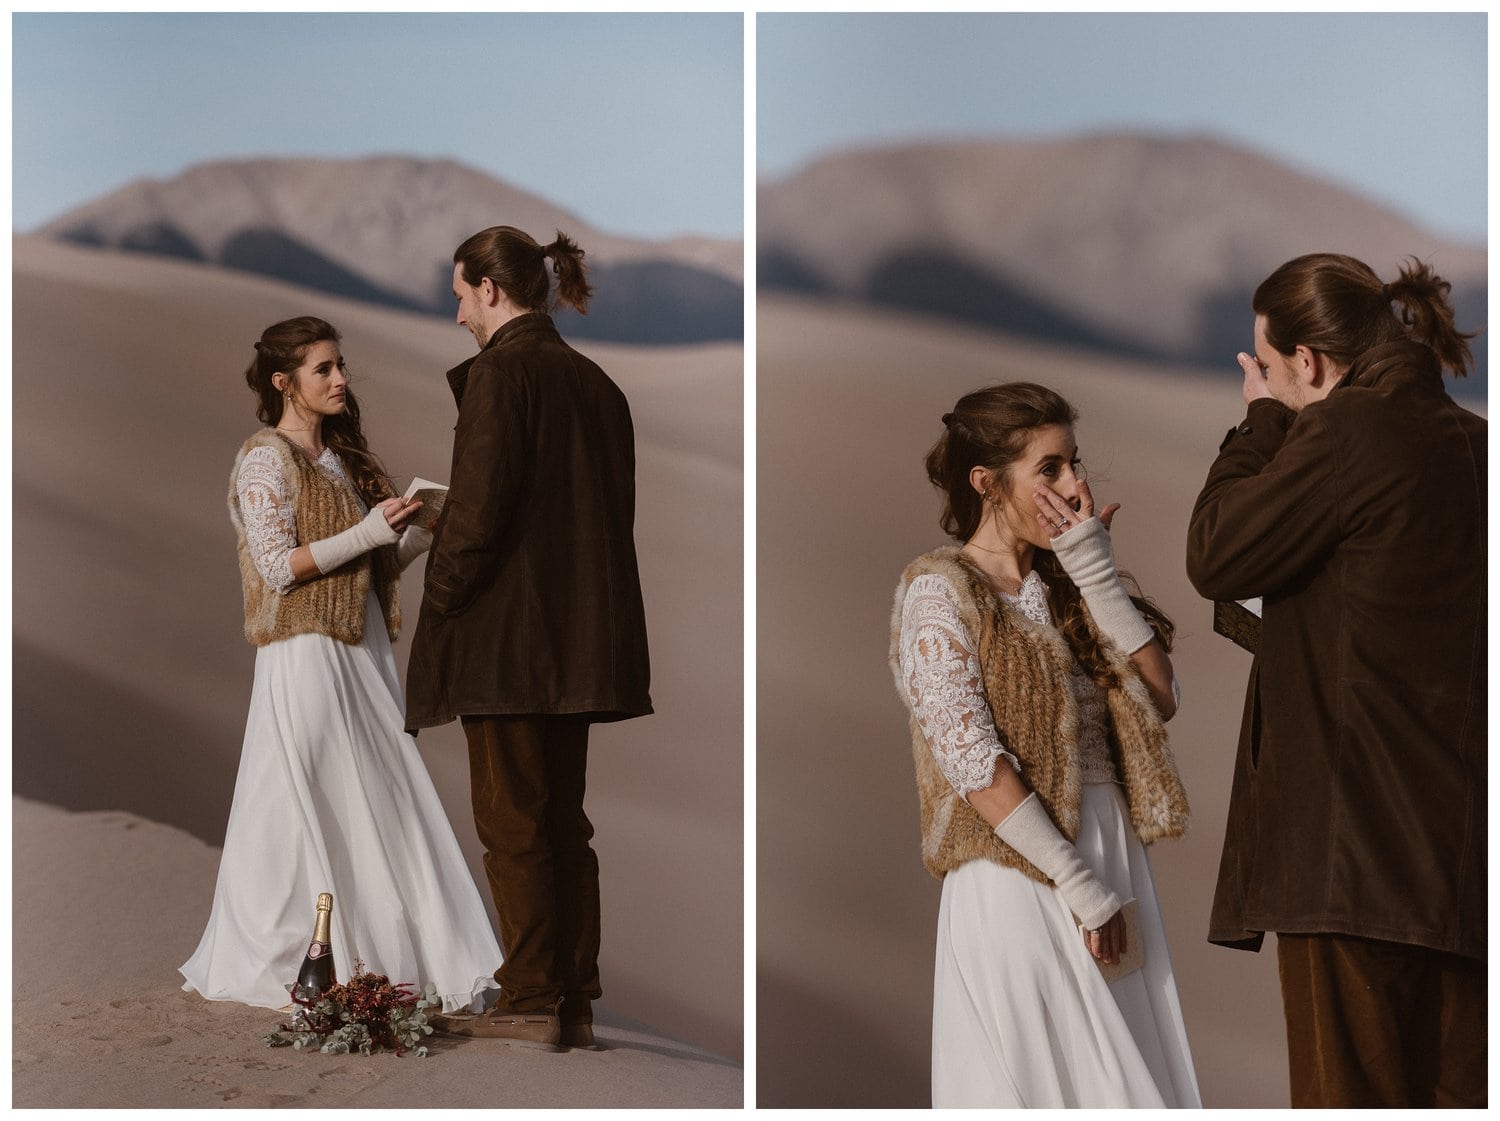 Bride and groom read their vows in Great Sand Dunes National Park.